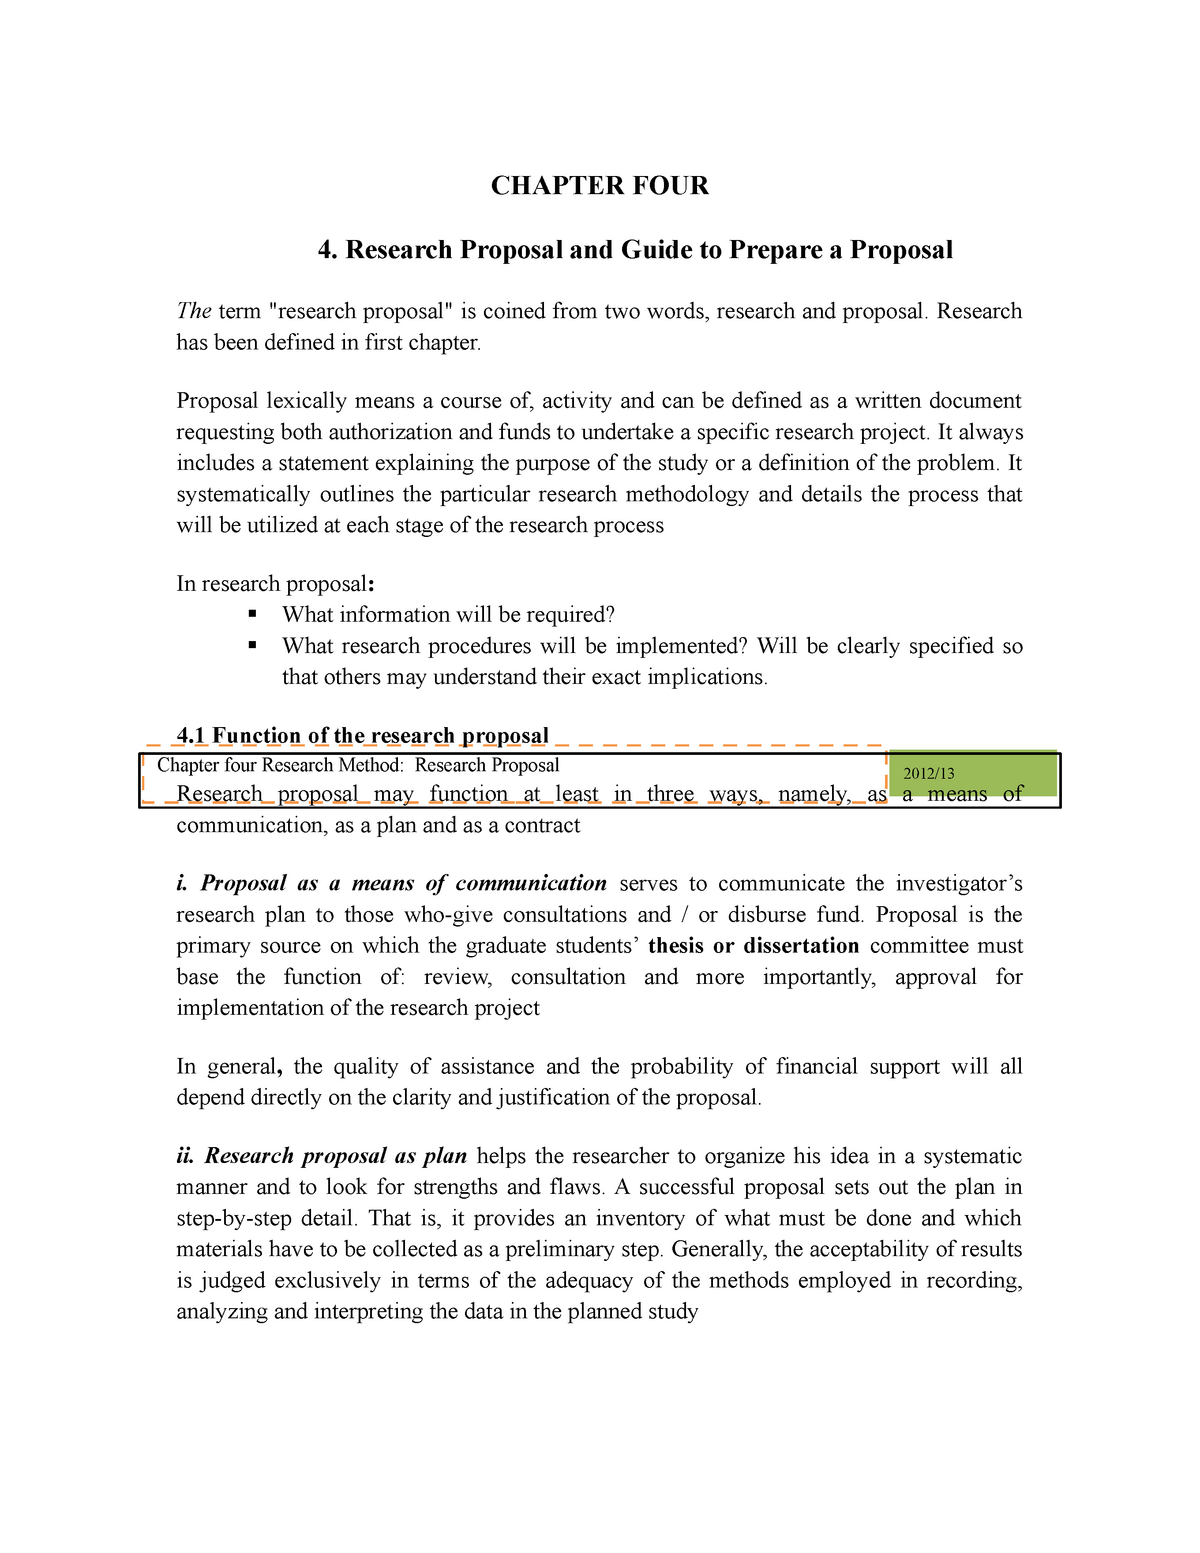 research proposal chapter 4 and 5